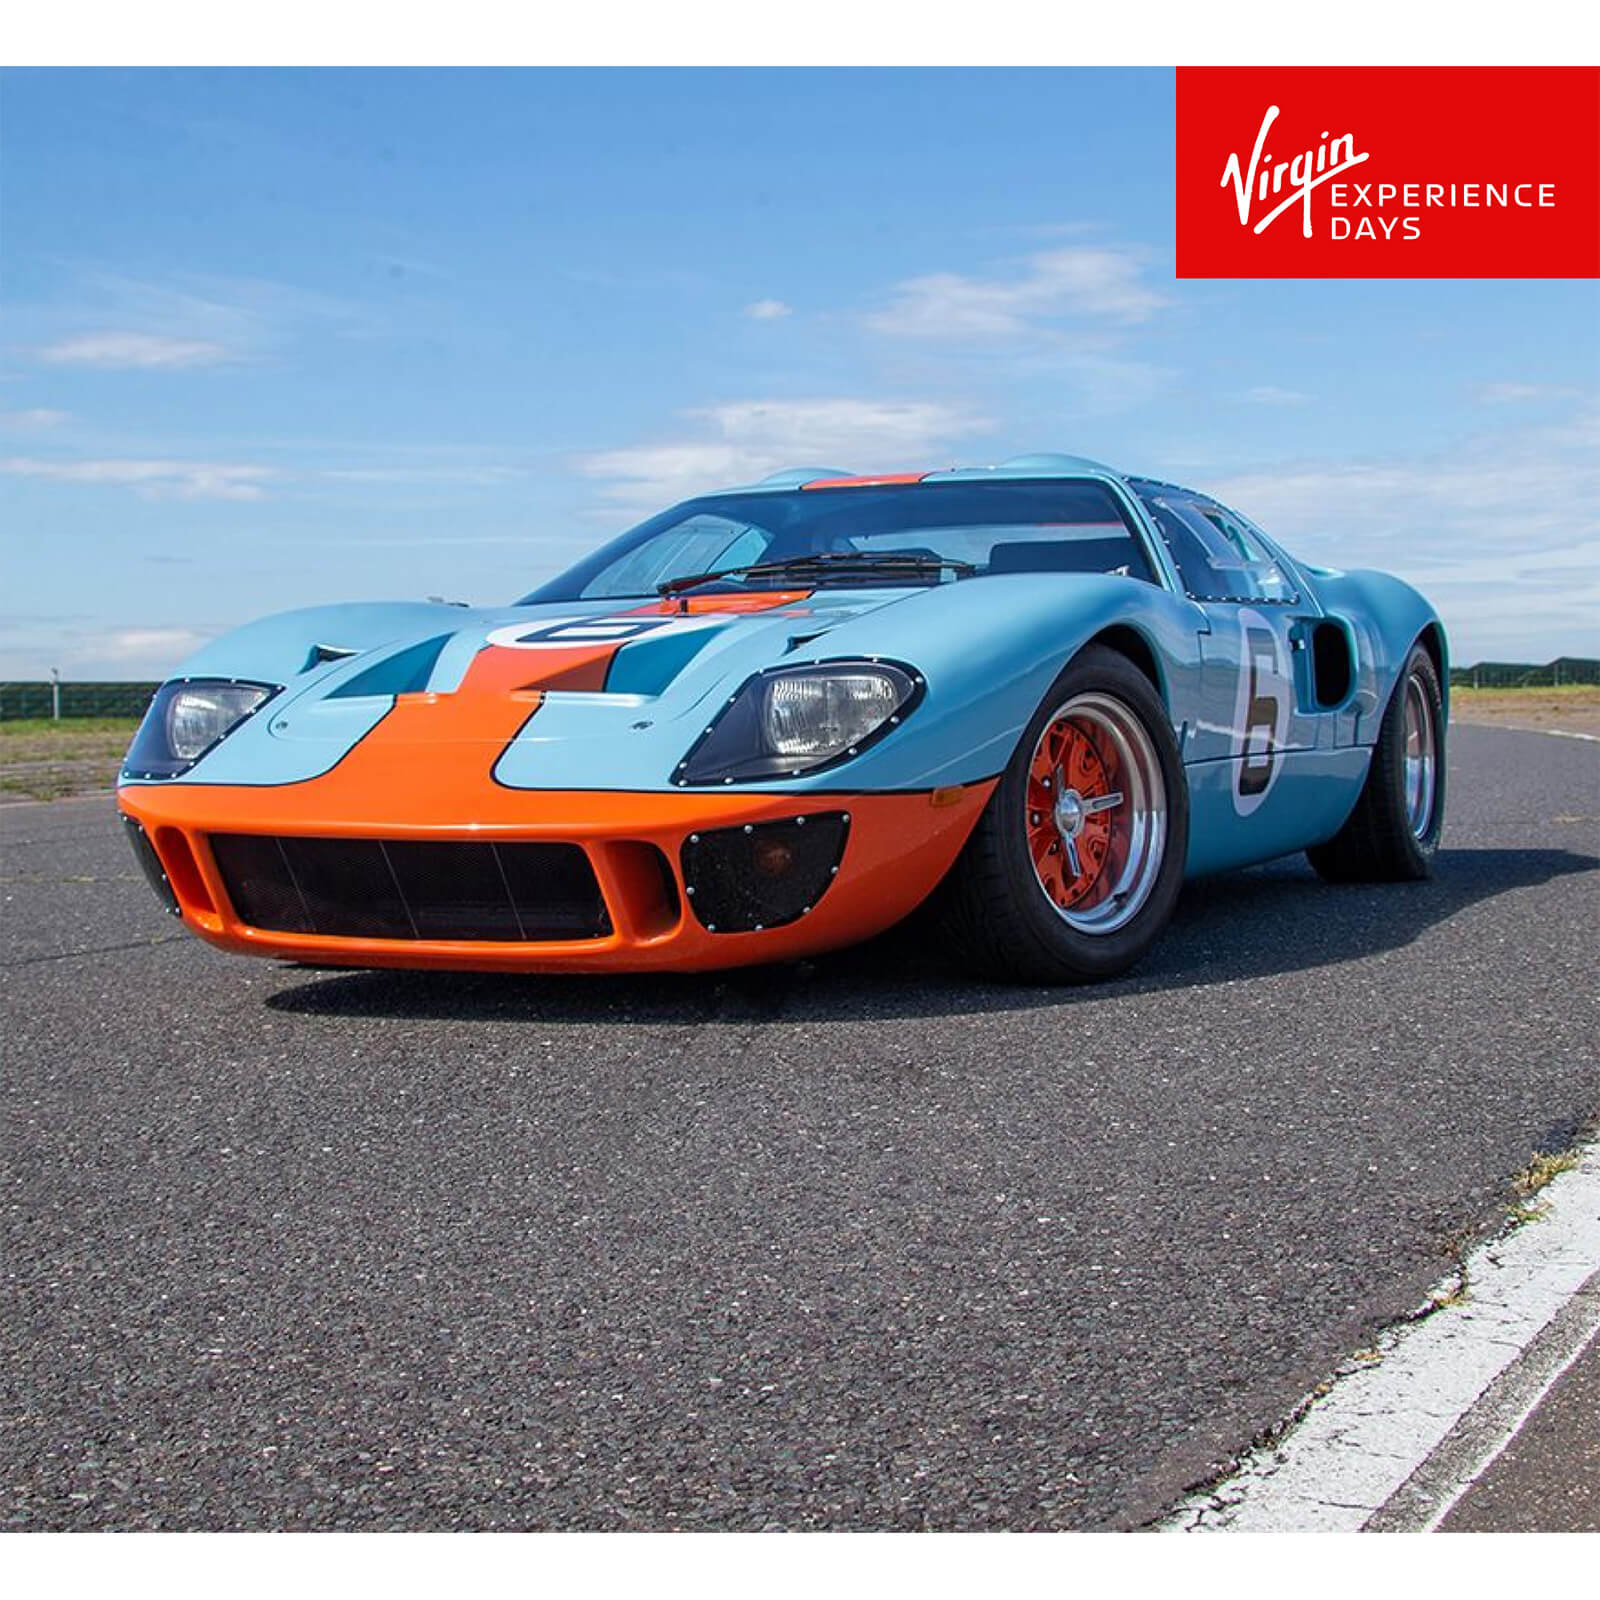 Iconic Classic Car Racing Experience With Passenger Ride